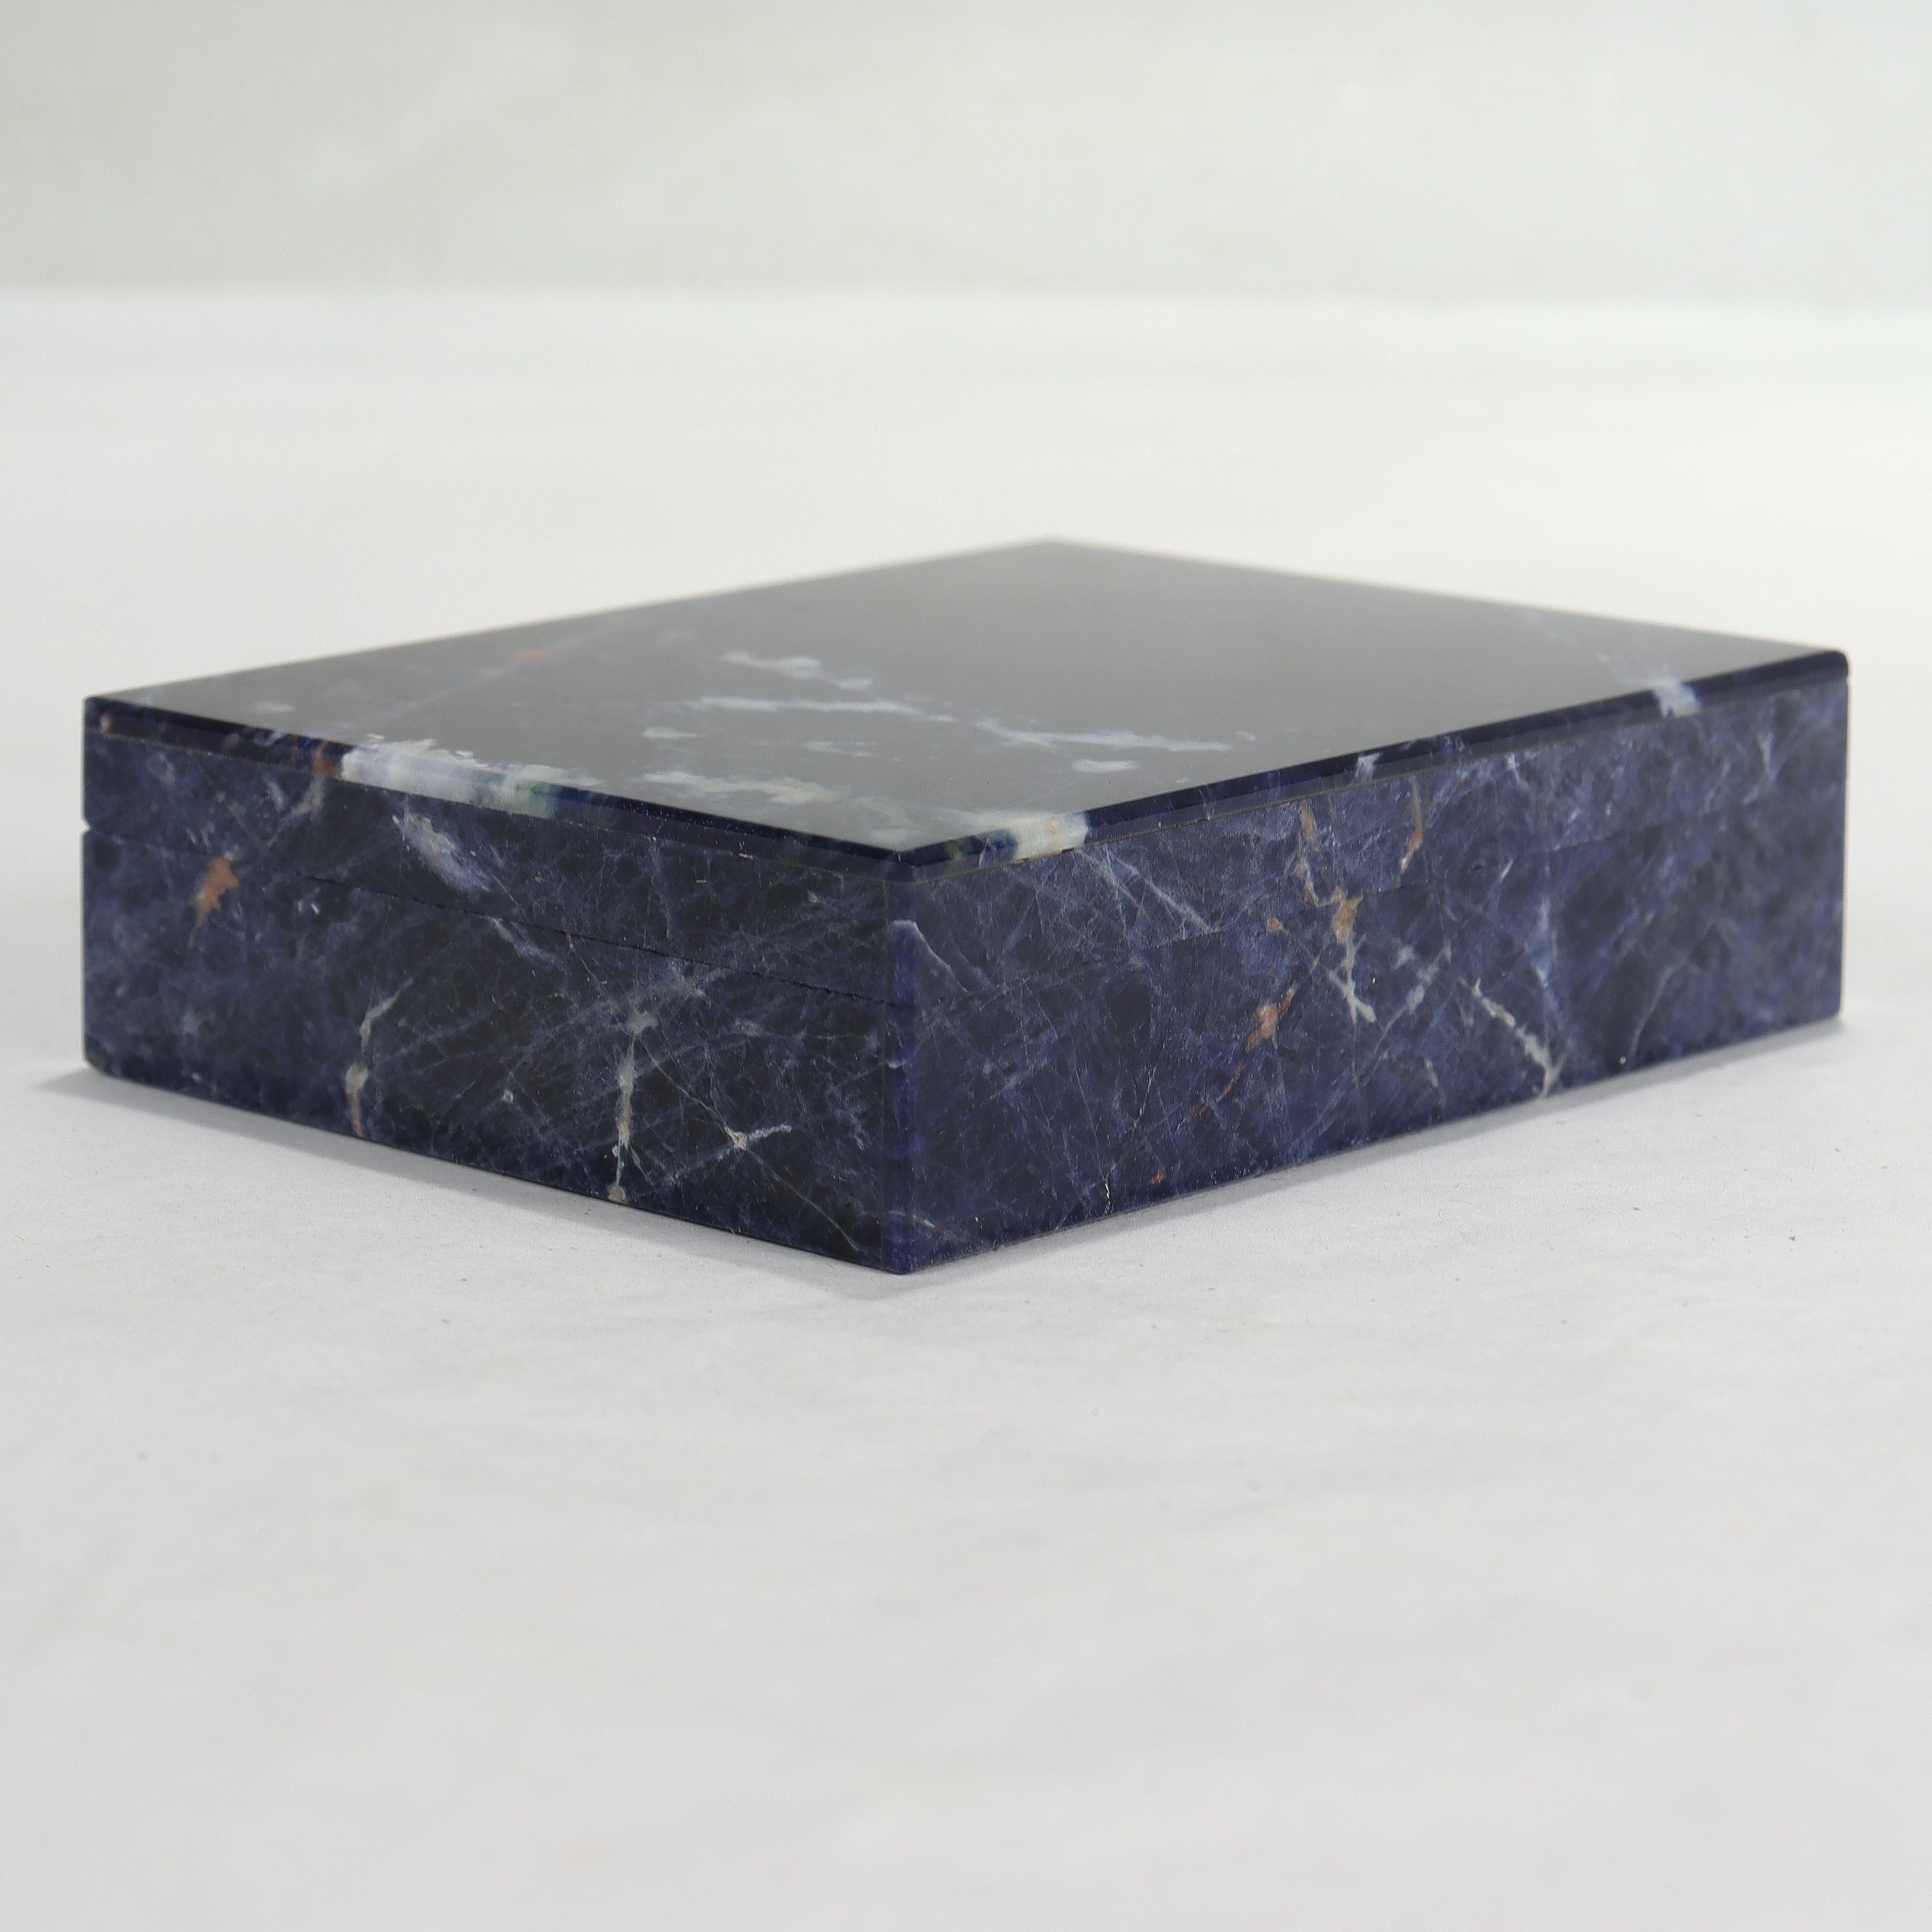 A fine small sized Italian Mid-Century Modern dresser or table box.

With sheets of lapis lazuli on black marble and mounted with a fine 800 silver mount and hinge.

Simply a wonderful midcentury table casket!

Date:
Mid-20th